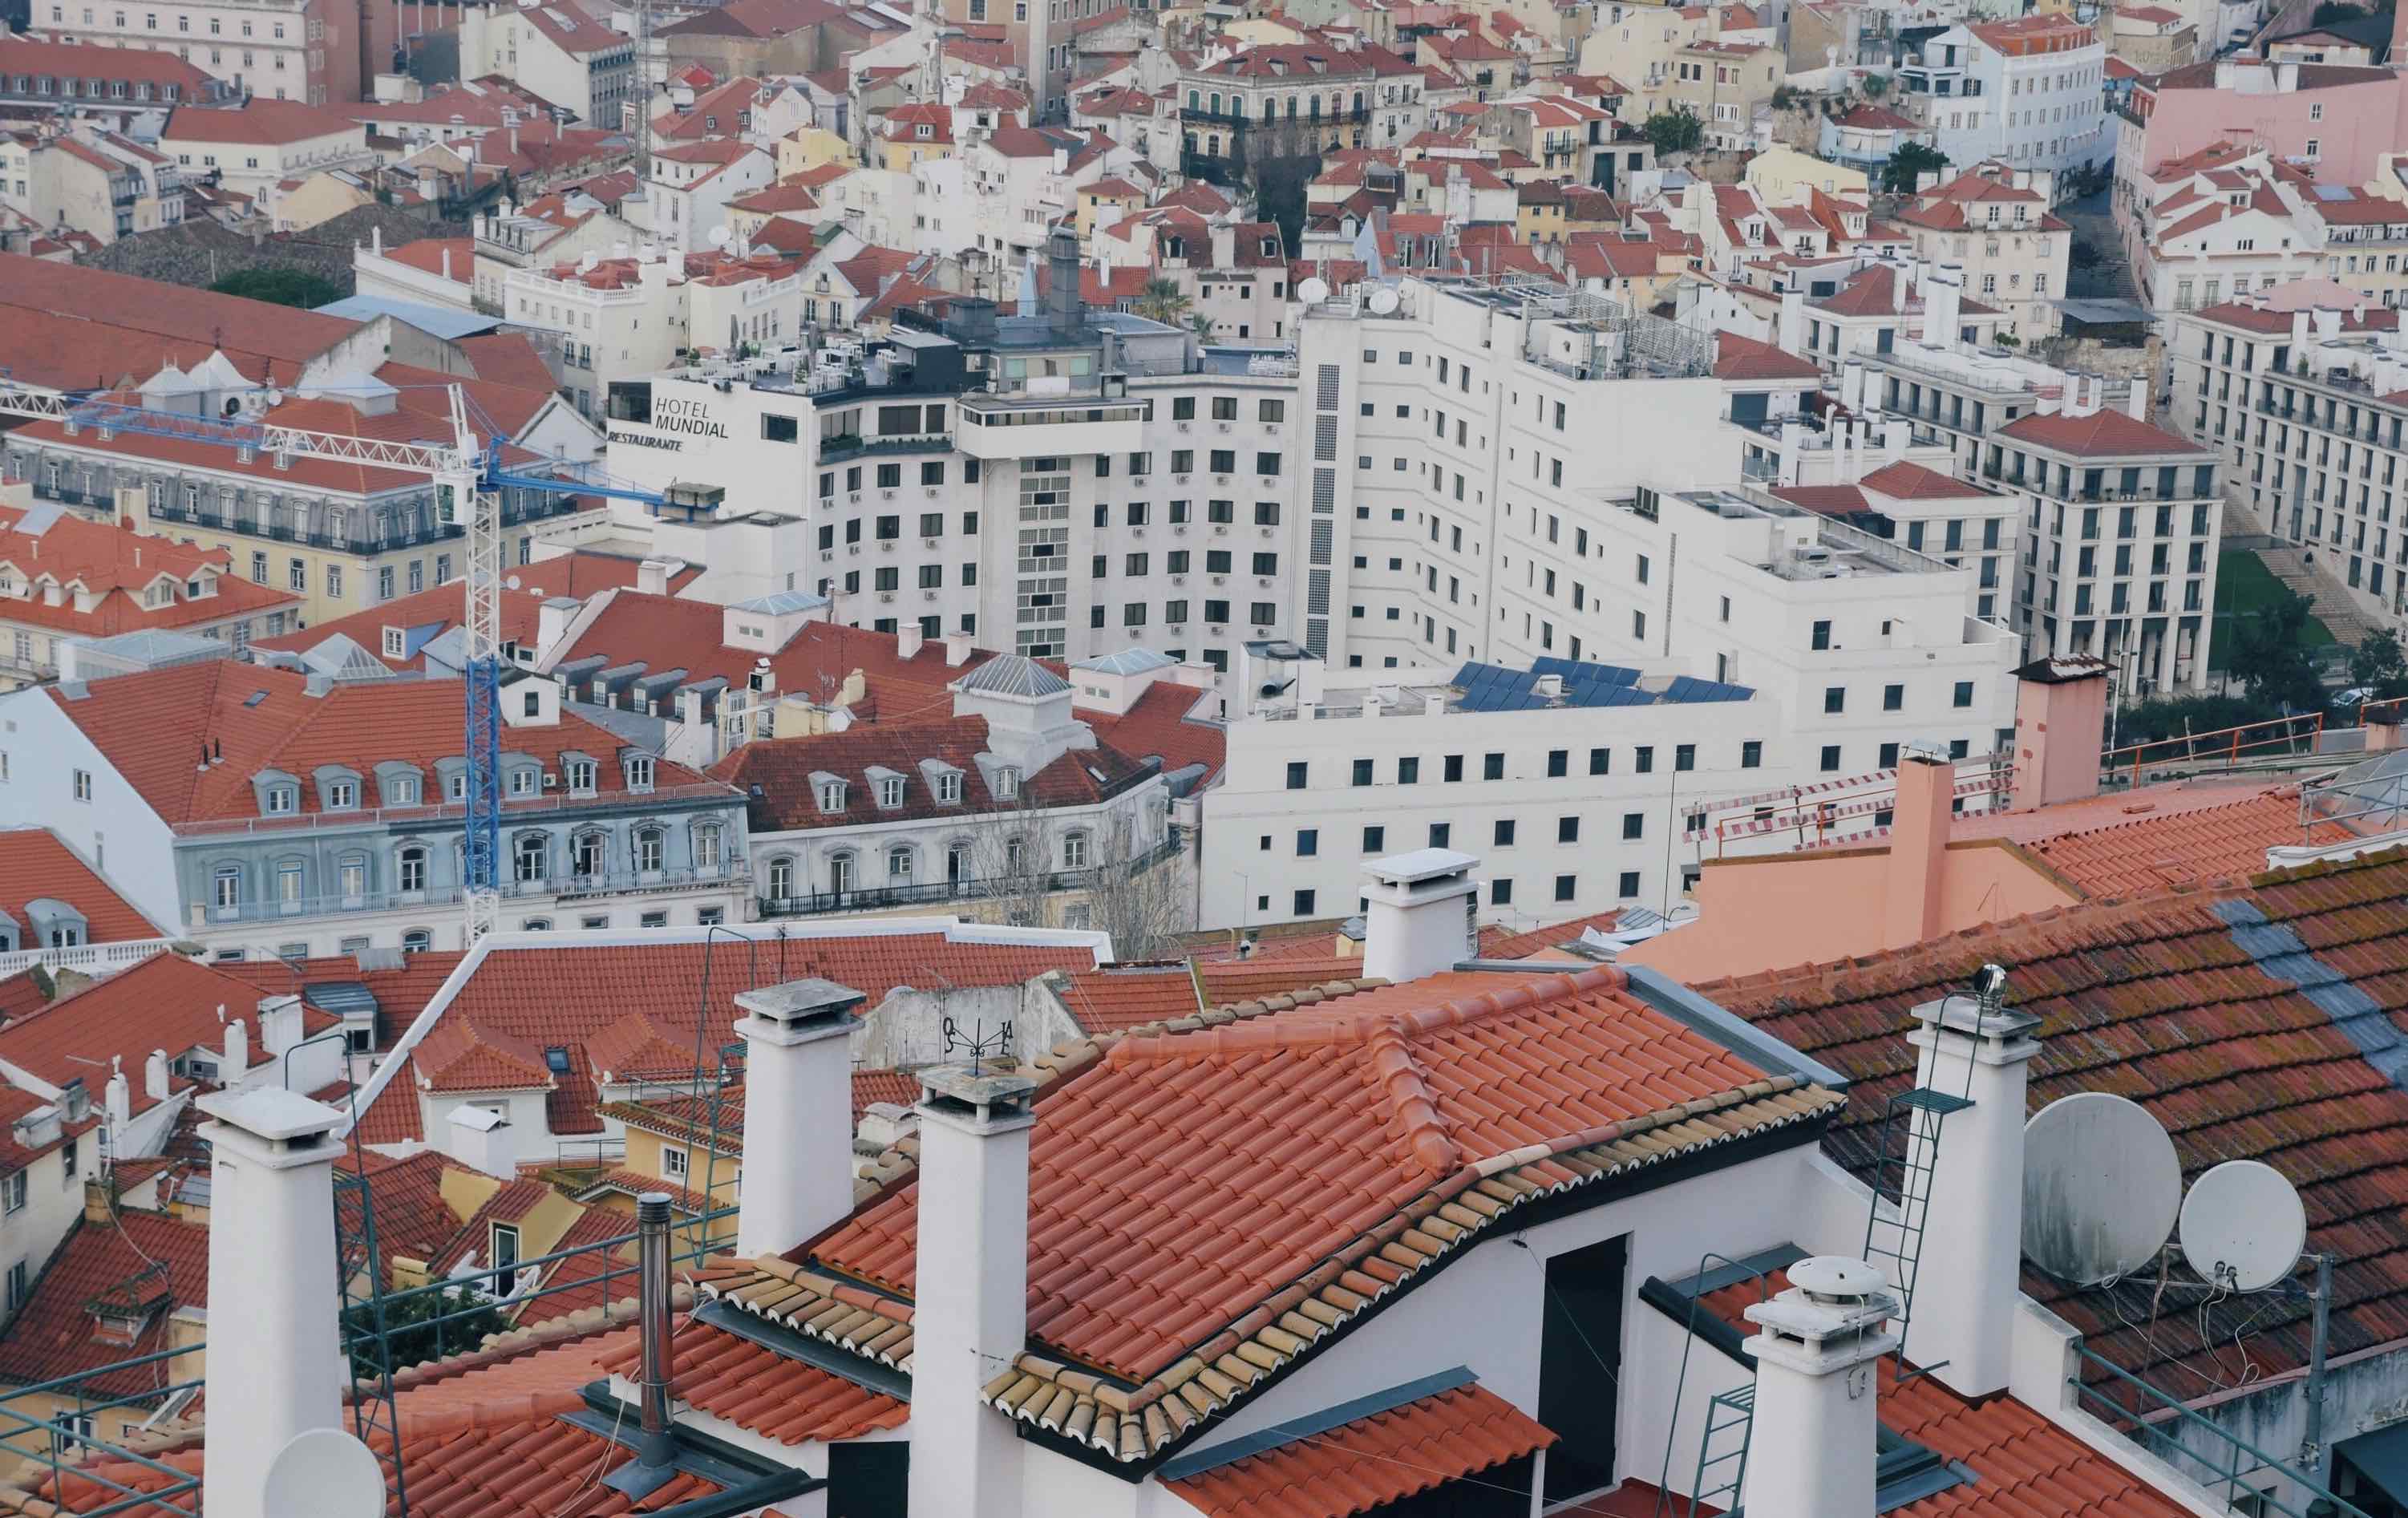 A landscape of buildings in Lisbon withwhite walls and orange roofs